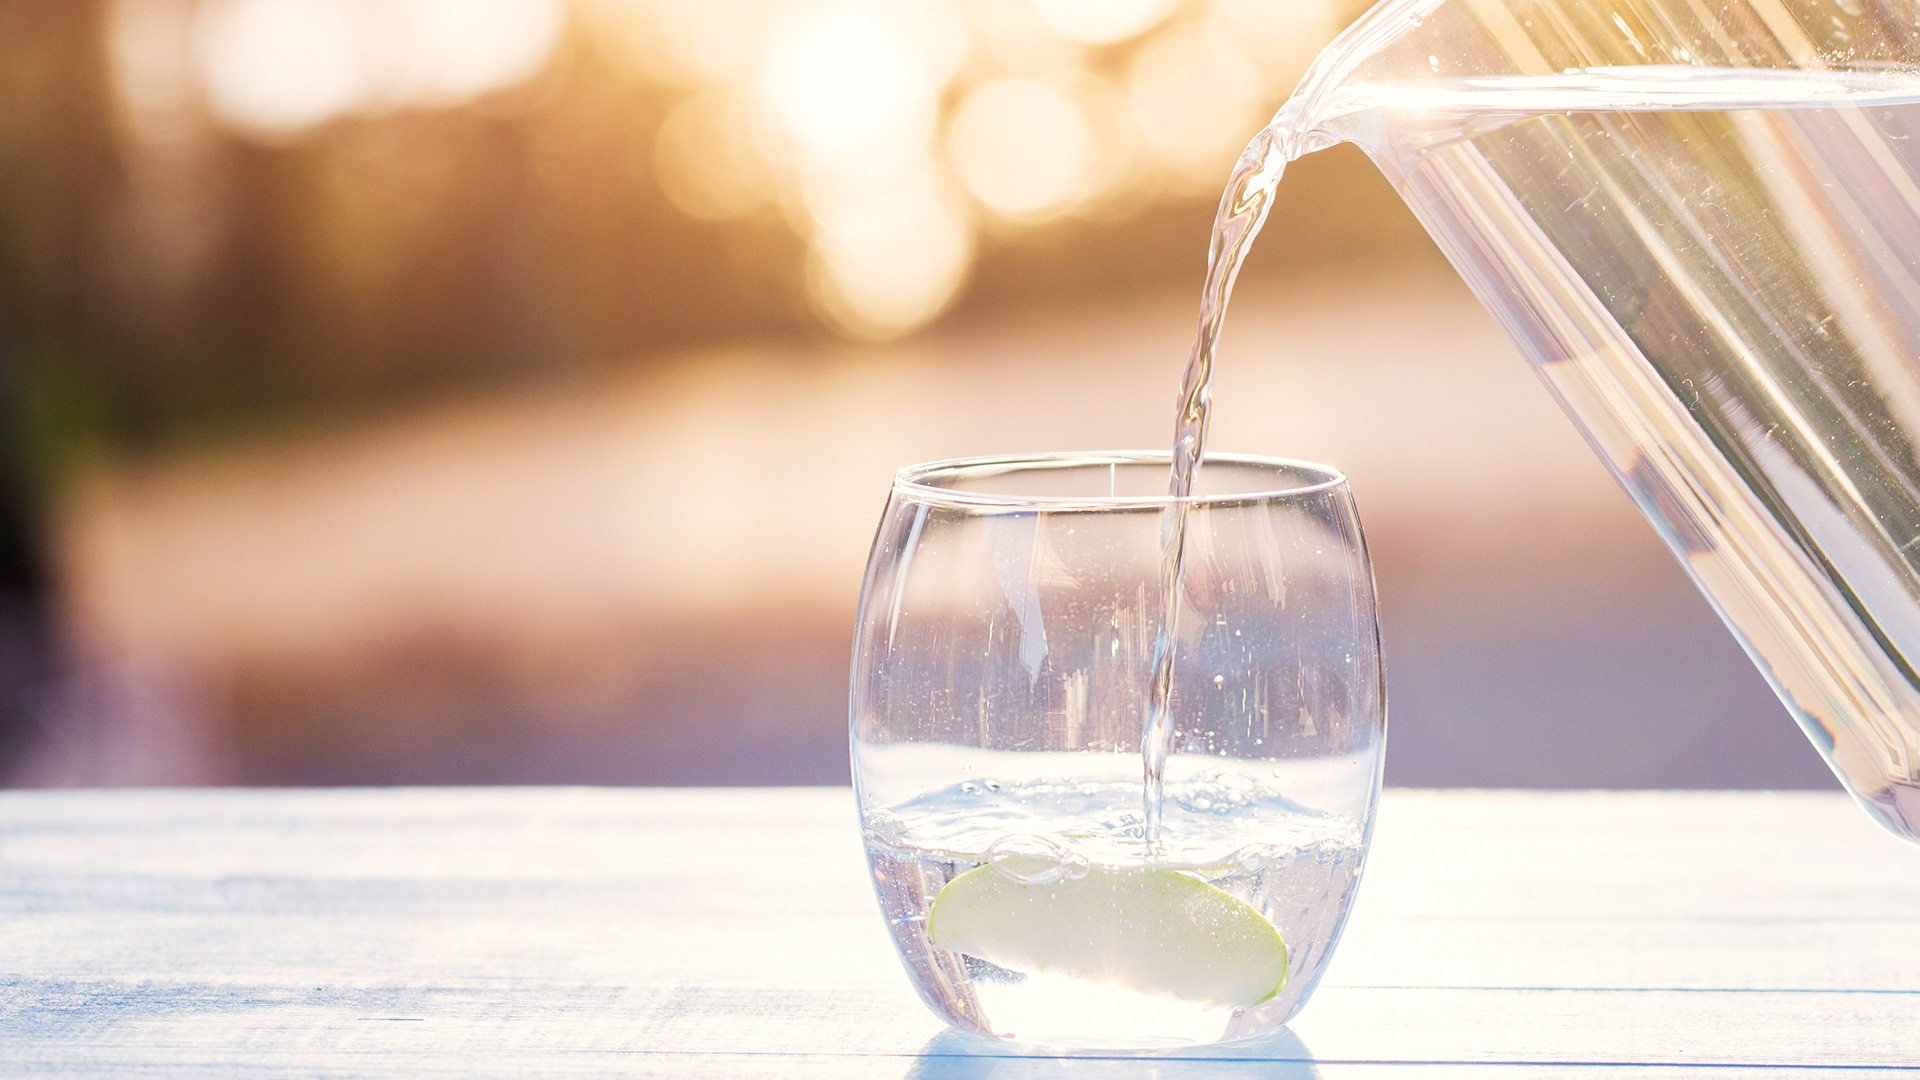 From relieving dry skin to protecting joints, water helps children's bodies rejuvenate and stay hydrated. Dr. Shivani Mehta, pediatrician at Atrium Health, explains the added health benefits of drinking more water and easy ways to incorporate drinking water into your child's daily routine.